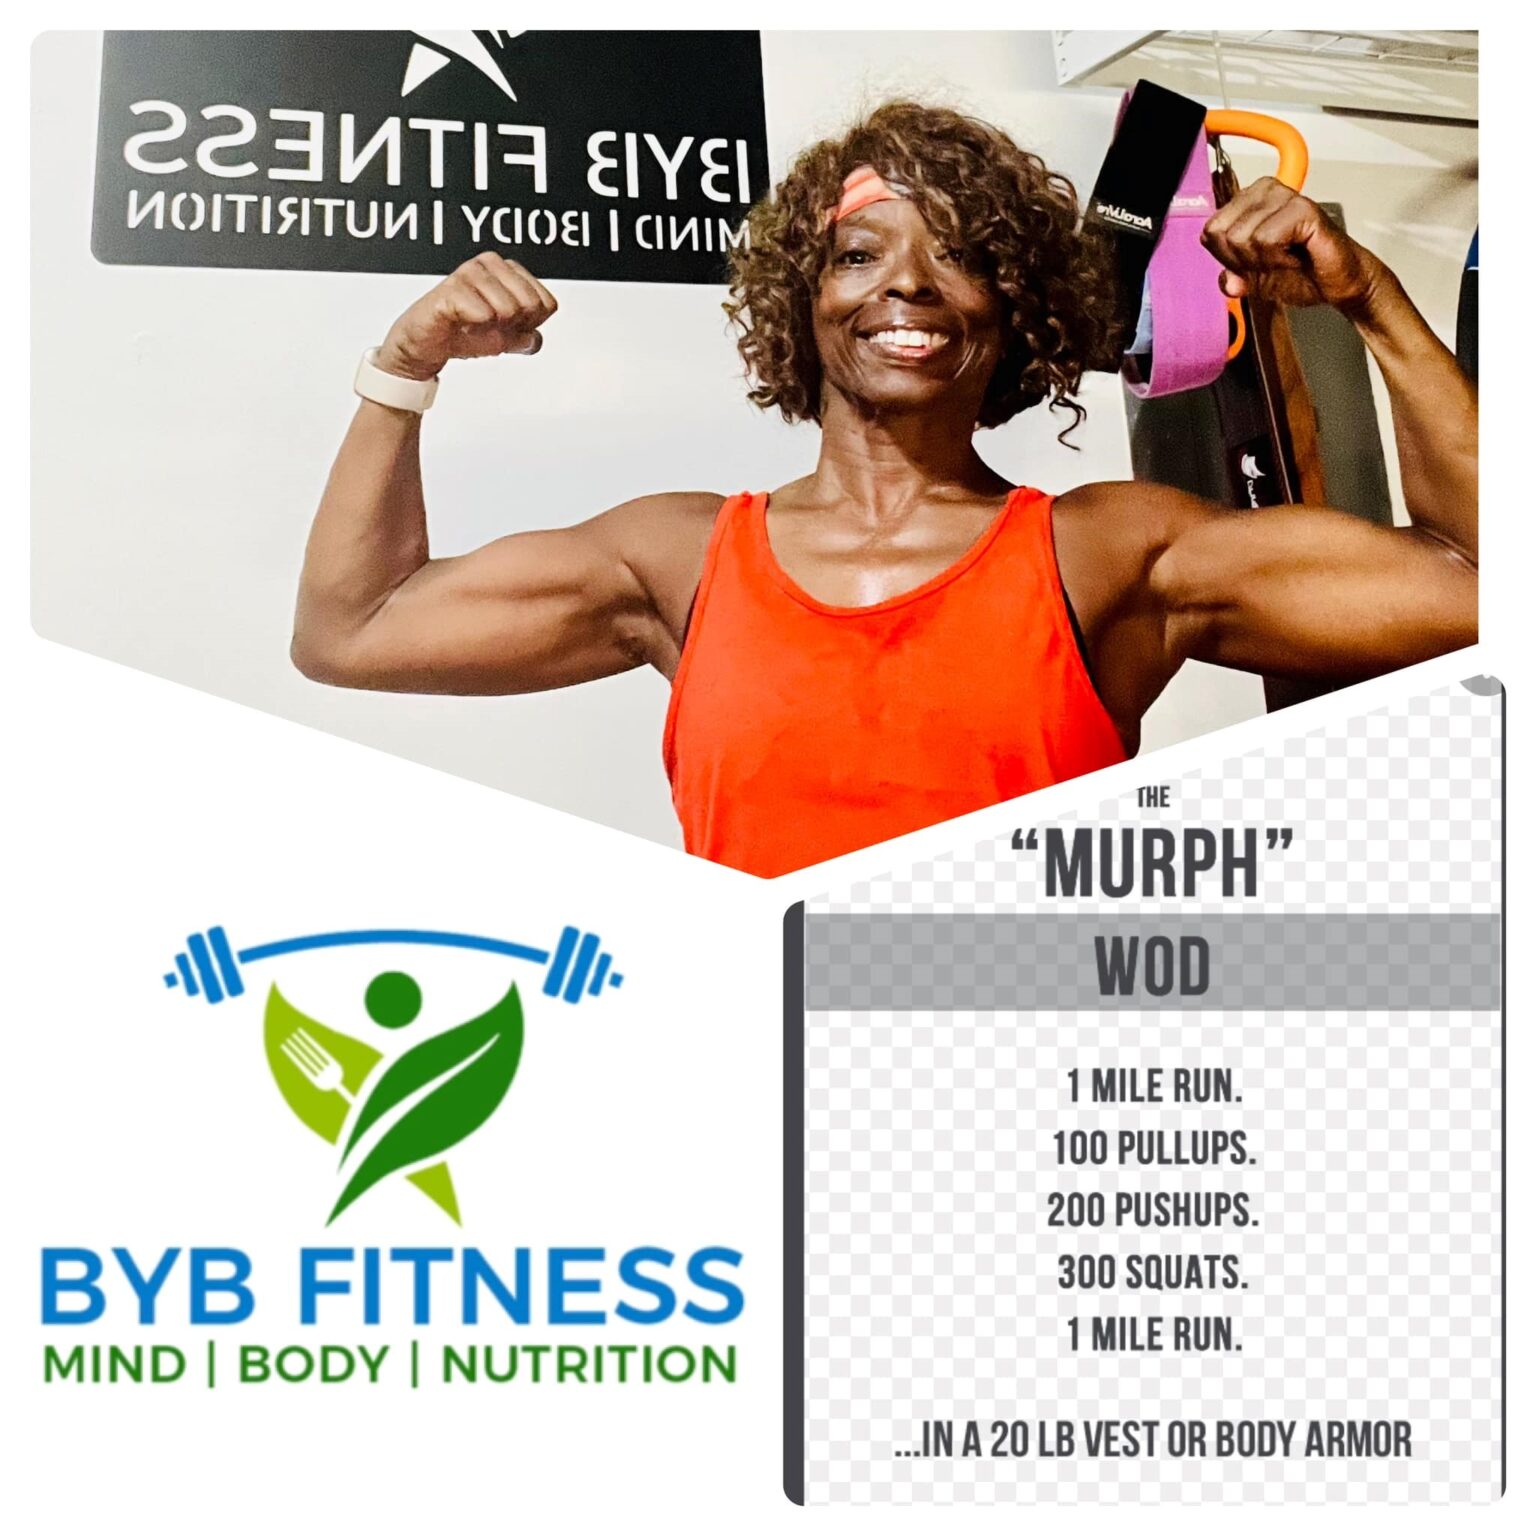 BYB Fitness Pster with Dr. Cynthia Simon